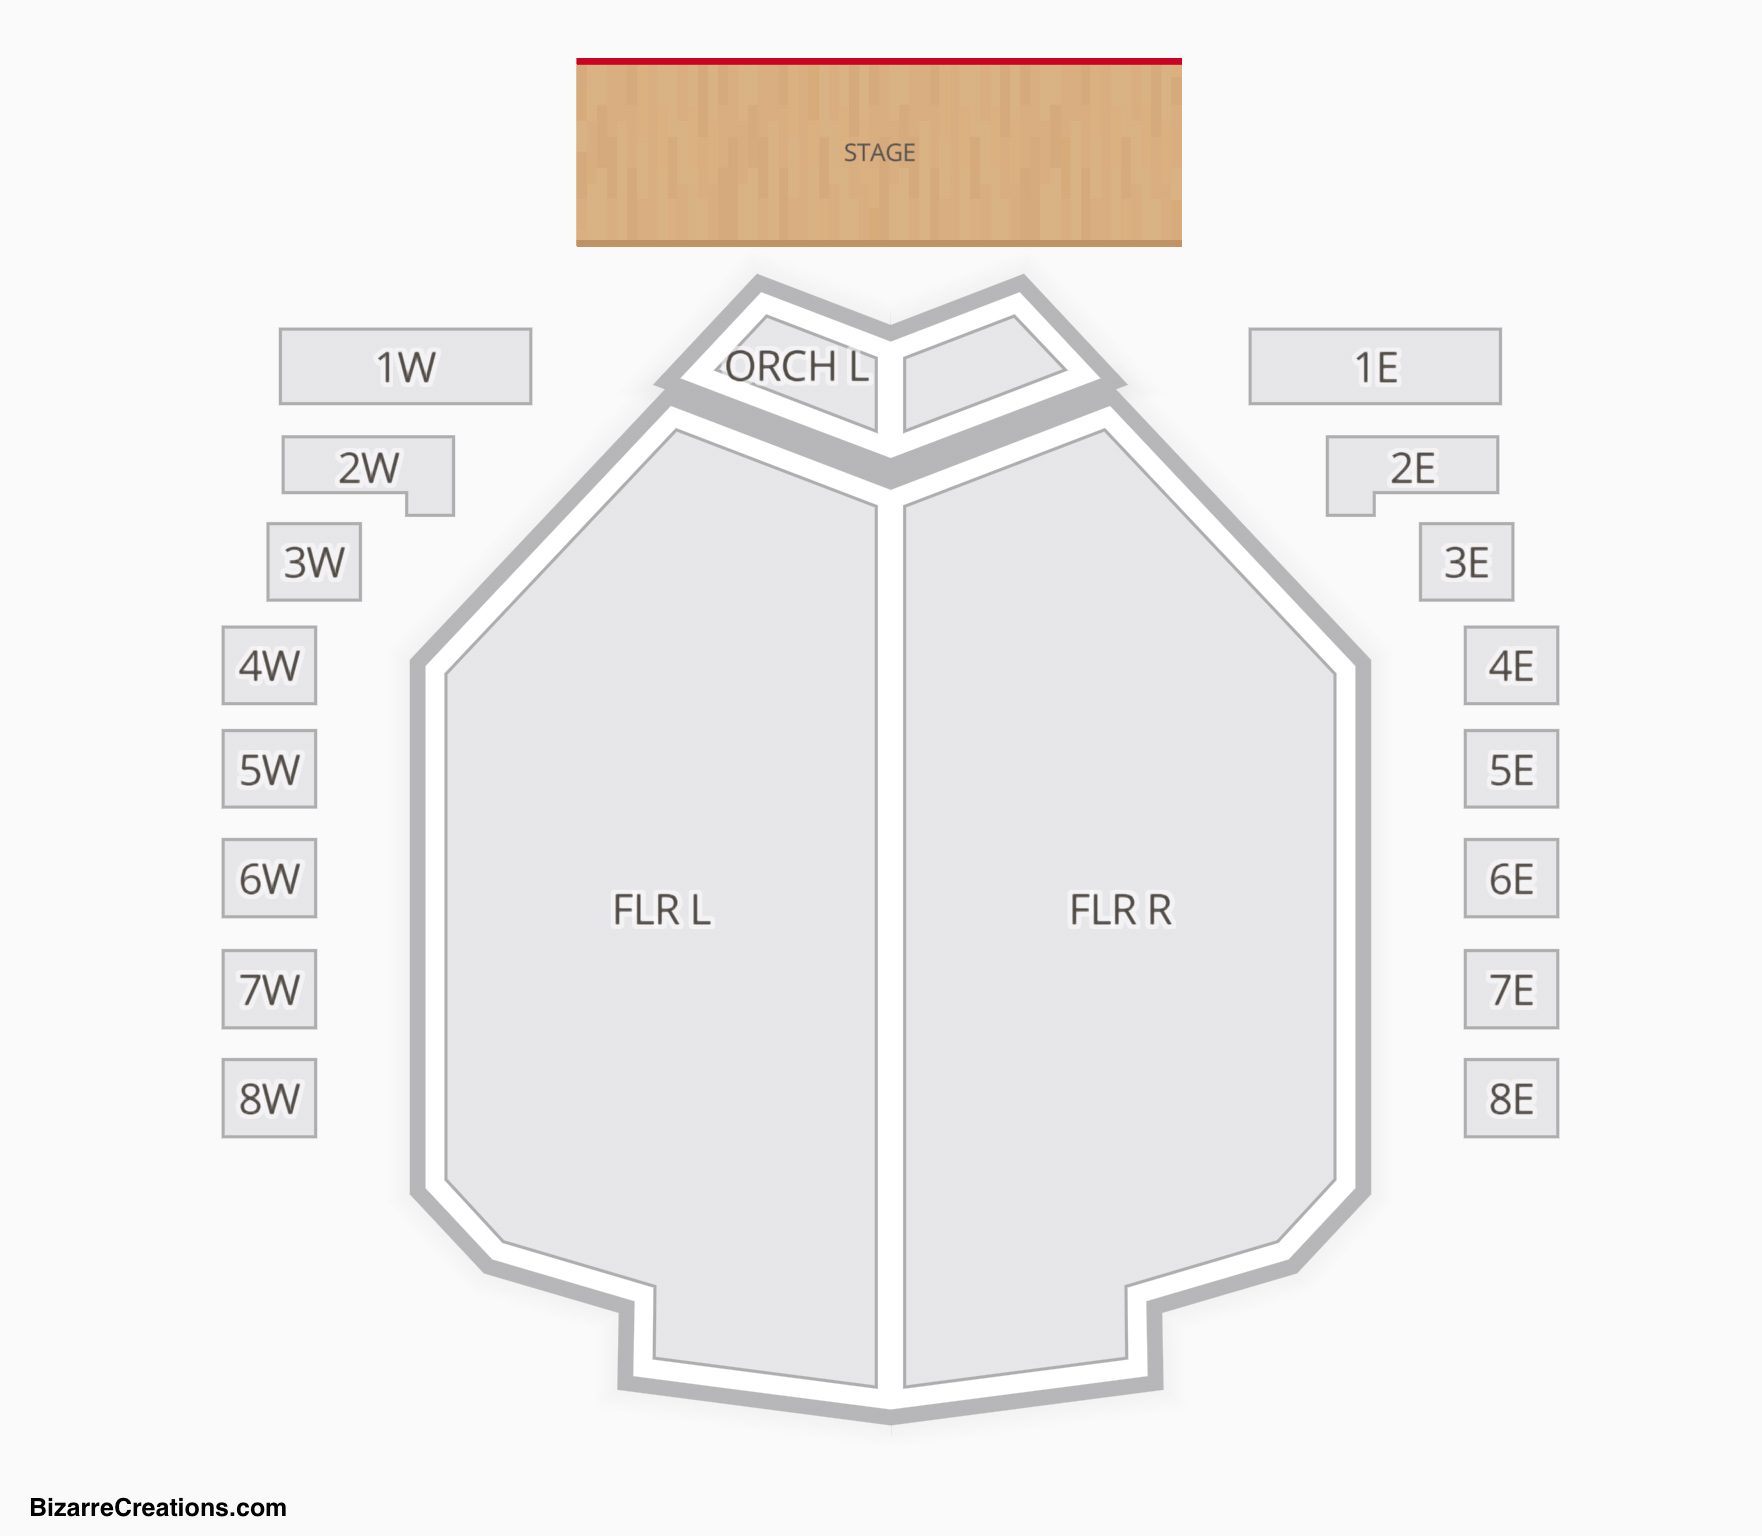 Des Moines Civic Center Seating Charts Views Games Answers Cheats